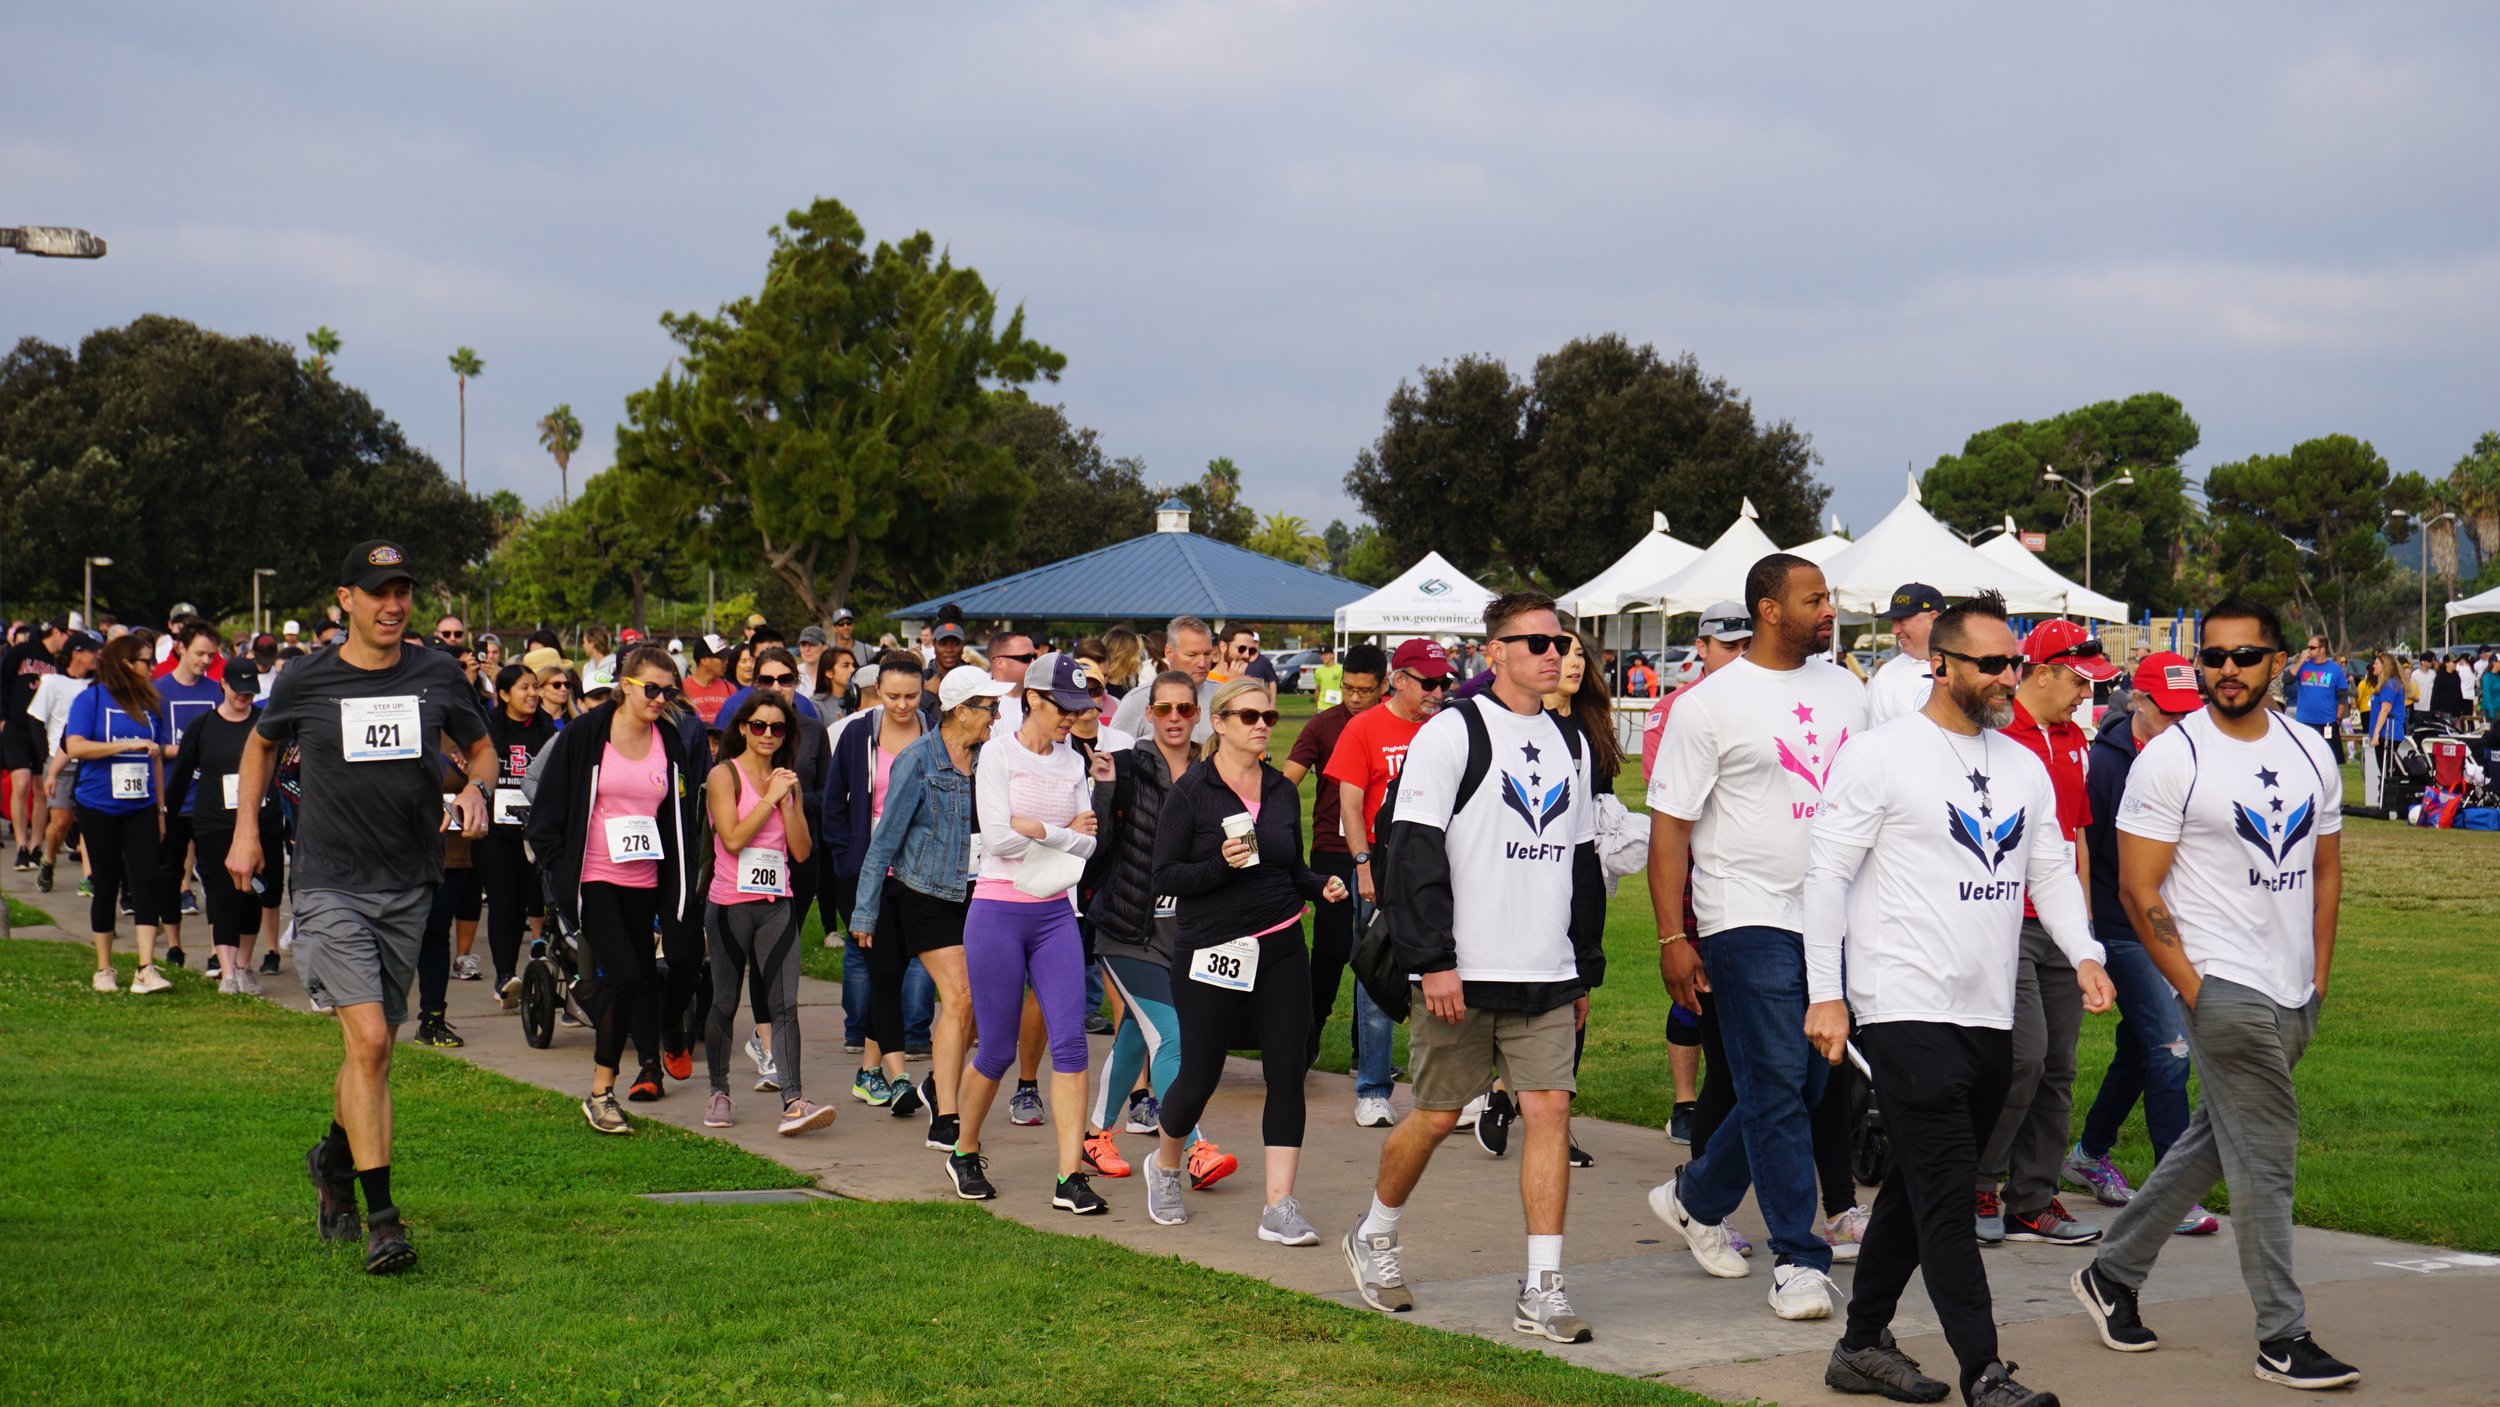 homeaid-san-diego-hosts-5th-annual-step-up-walk-to-end-homelessness